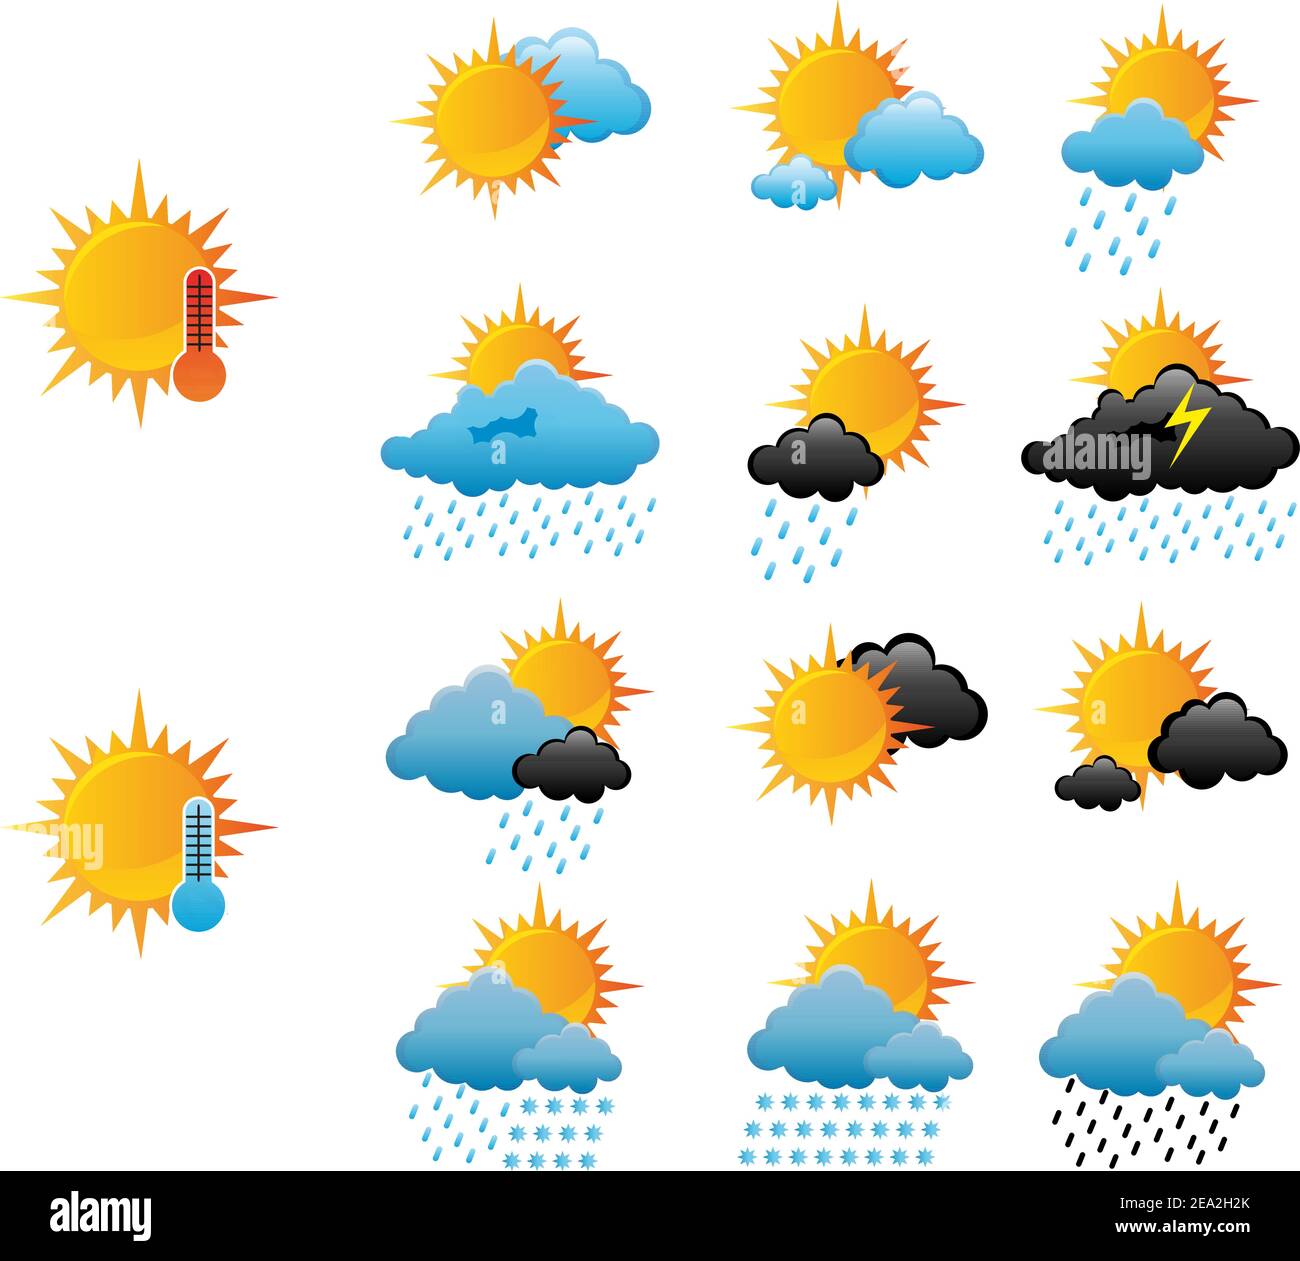 Set of weather icons for web design isolated on white Stock Vector